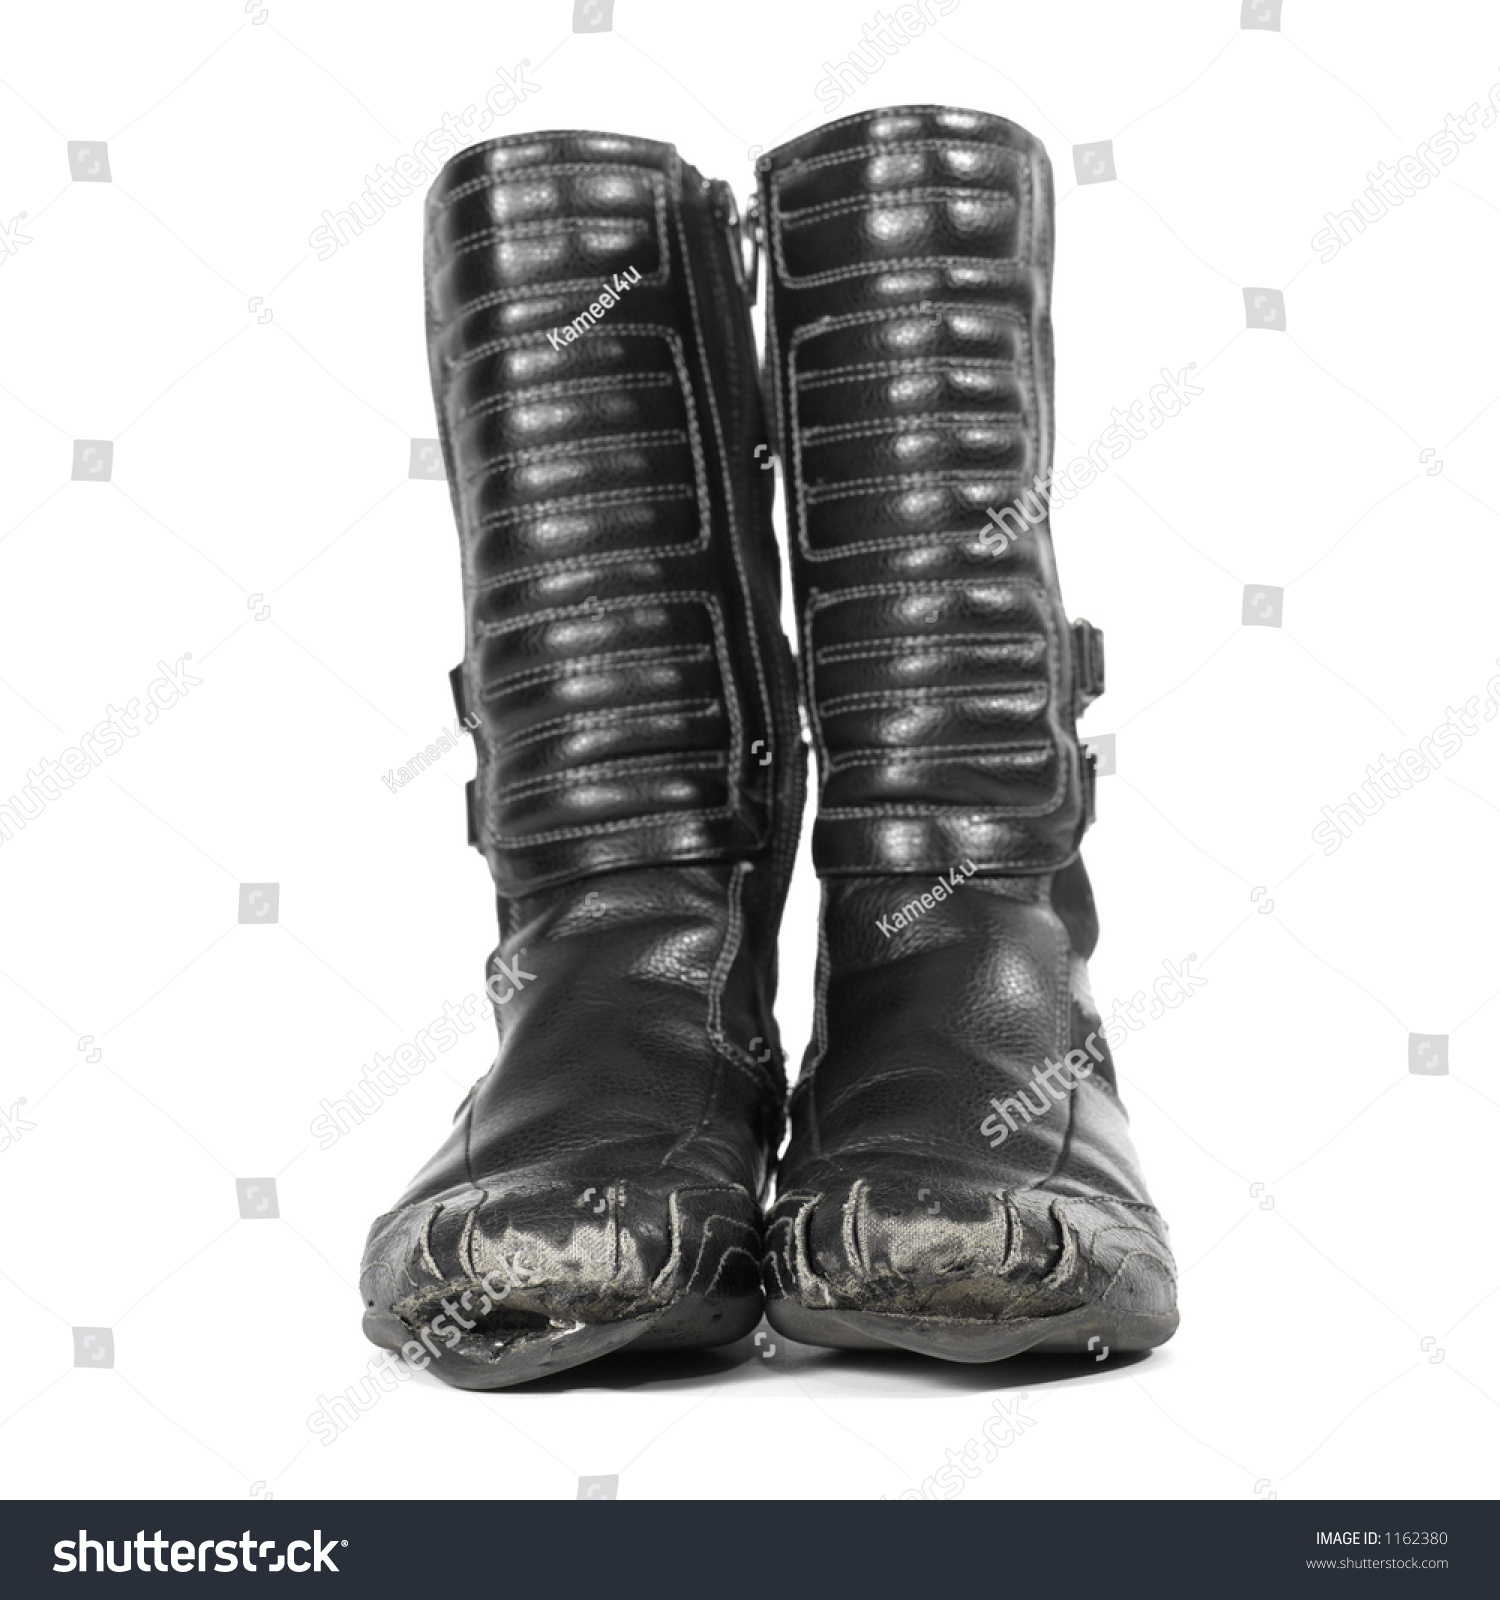 Worn Out Black Leather Boots Isolated Stock Photo 1162380 - Shutterstock